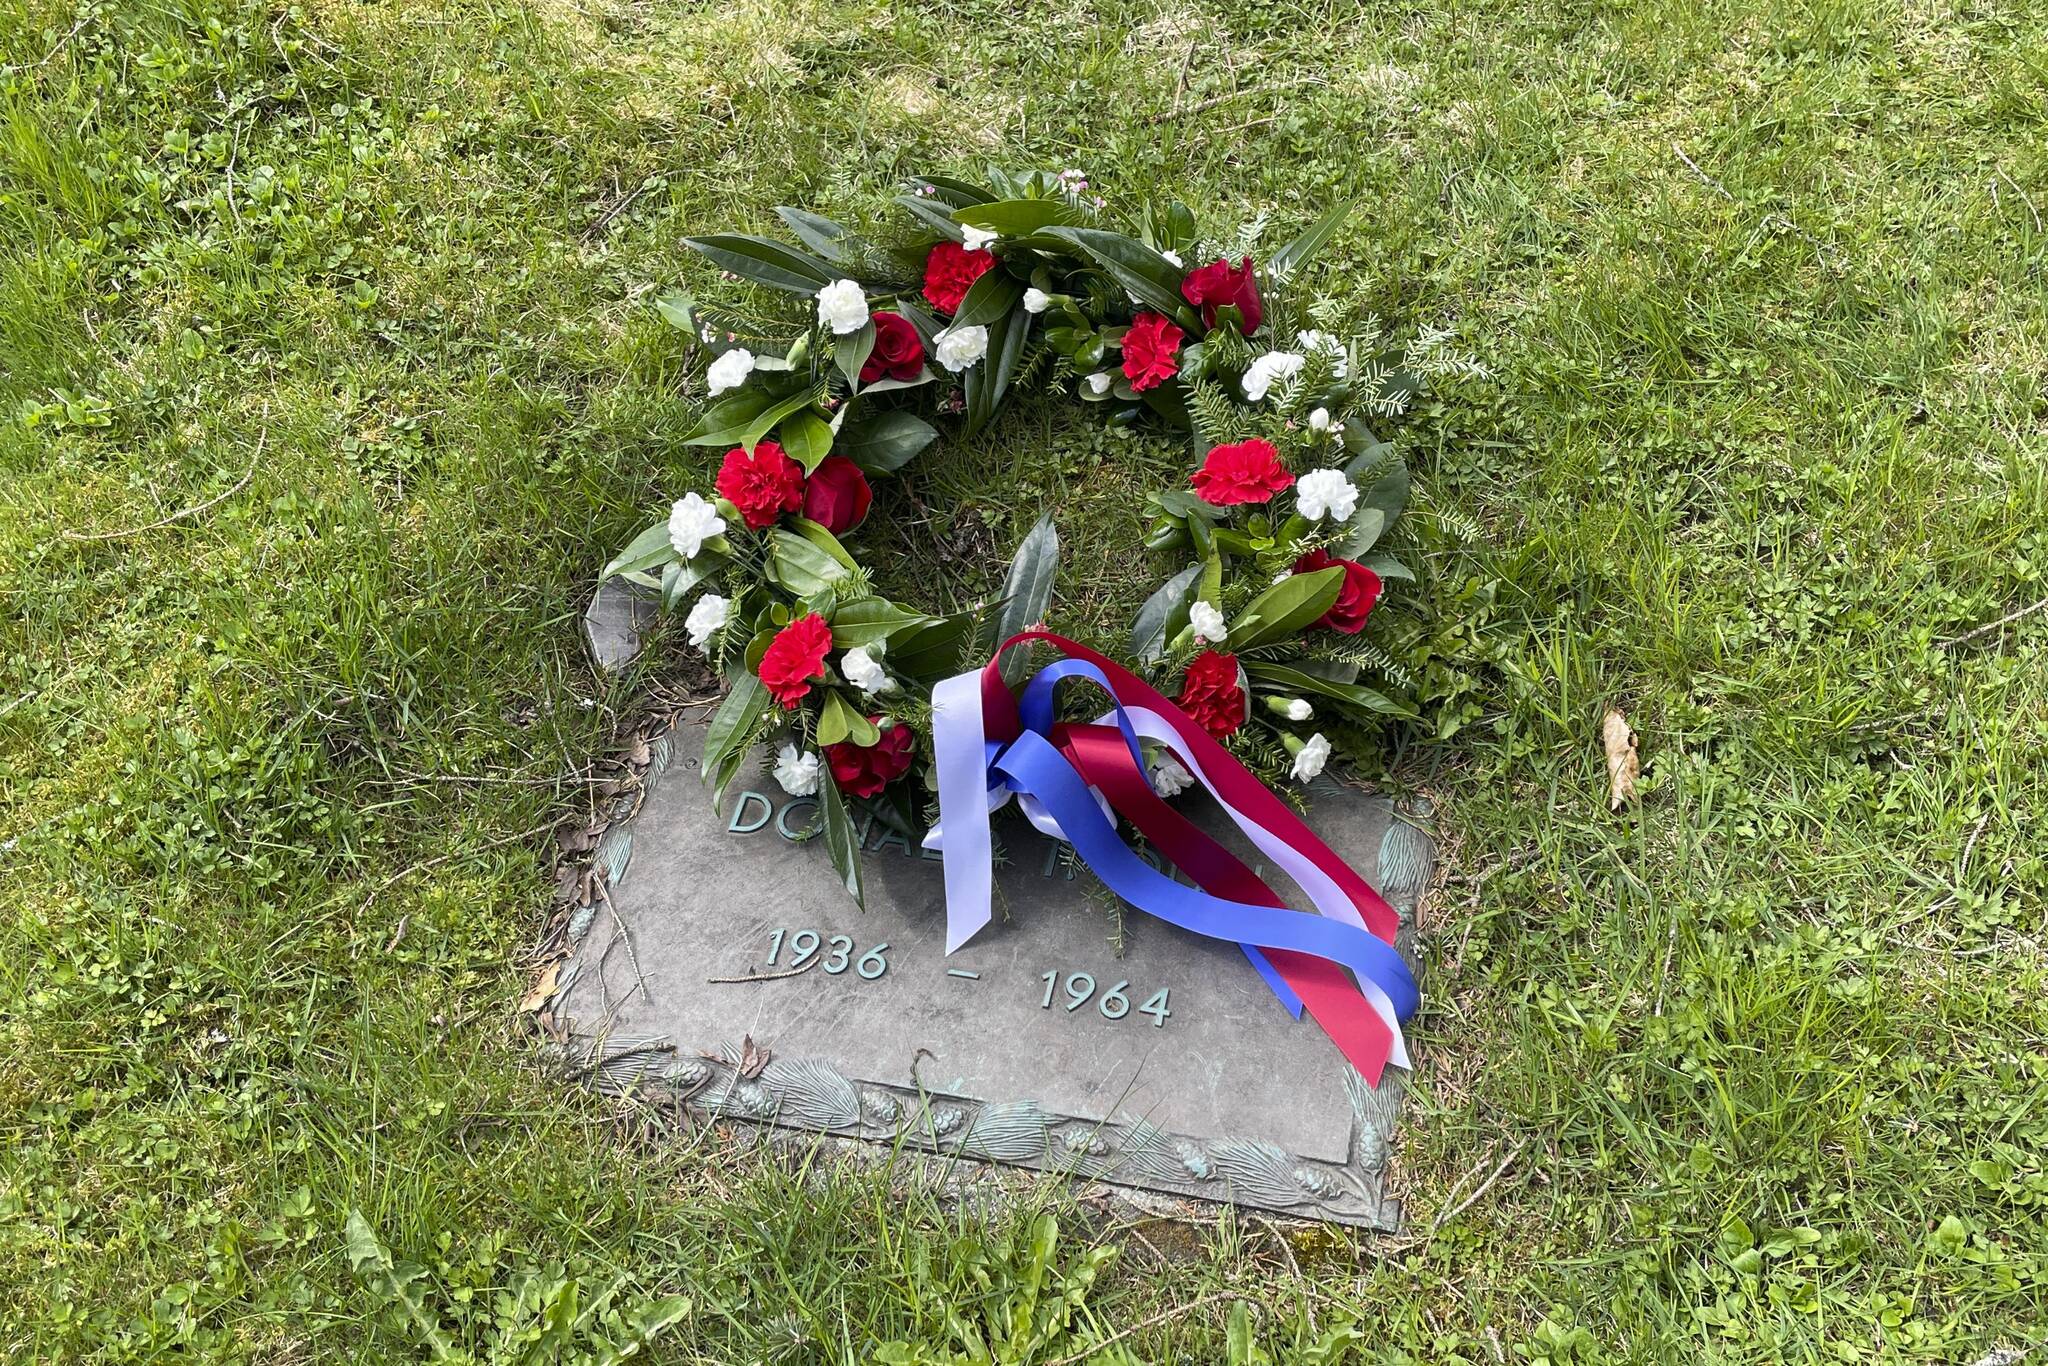 A wreath is laid on the grave of Donald T. Dull, a Juneau police officer killed on duty in 1964, during a Peace Officers Memorial Day ceremony at Evergreen Cemetery on May 13, 2022. (Michael S. Lockett / Juneau Empire)